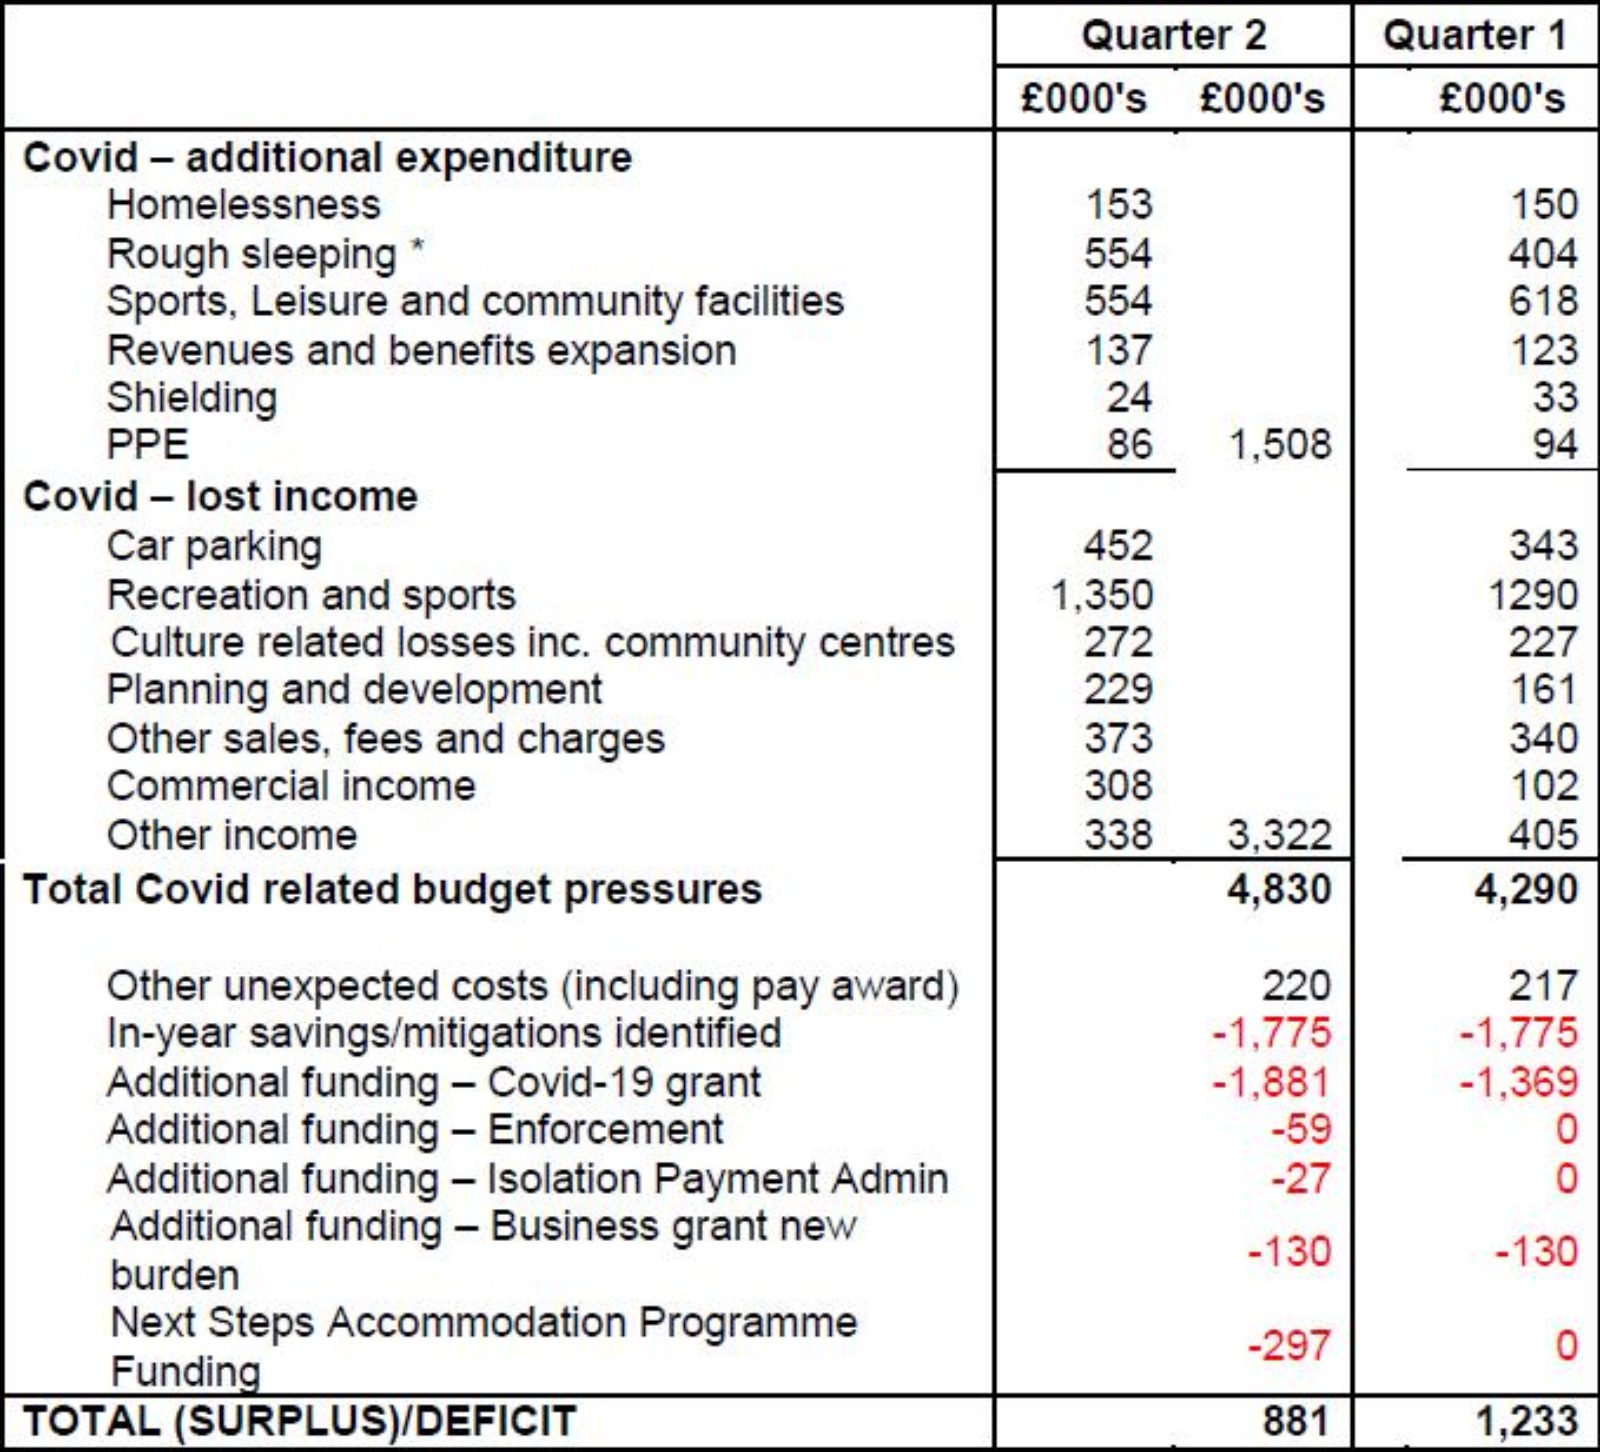 Covid expenditure and receipts